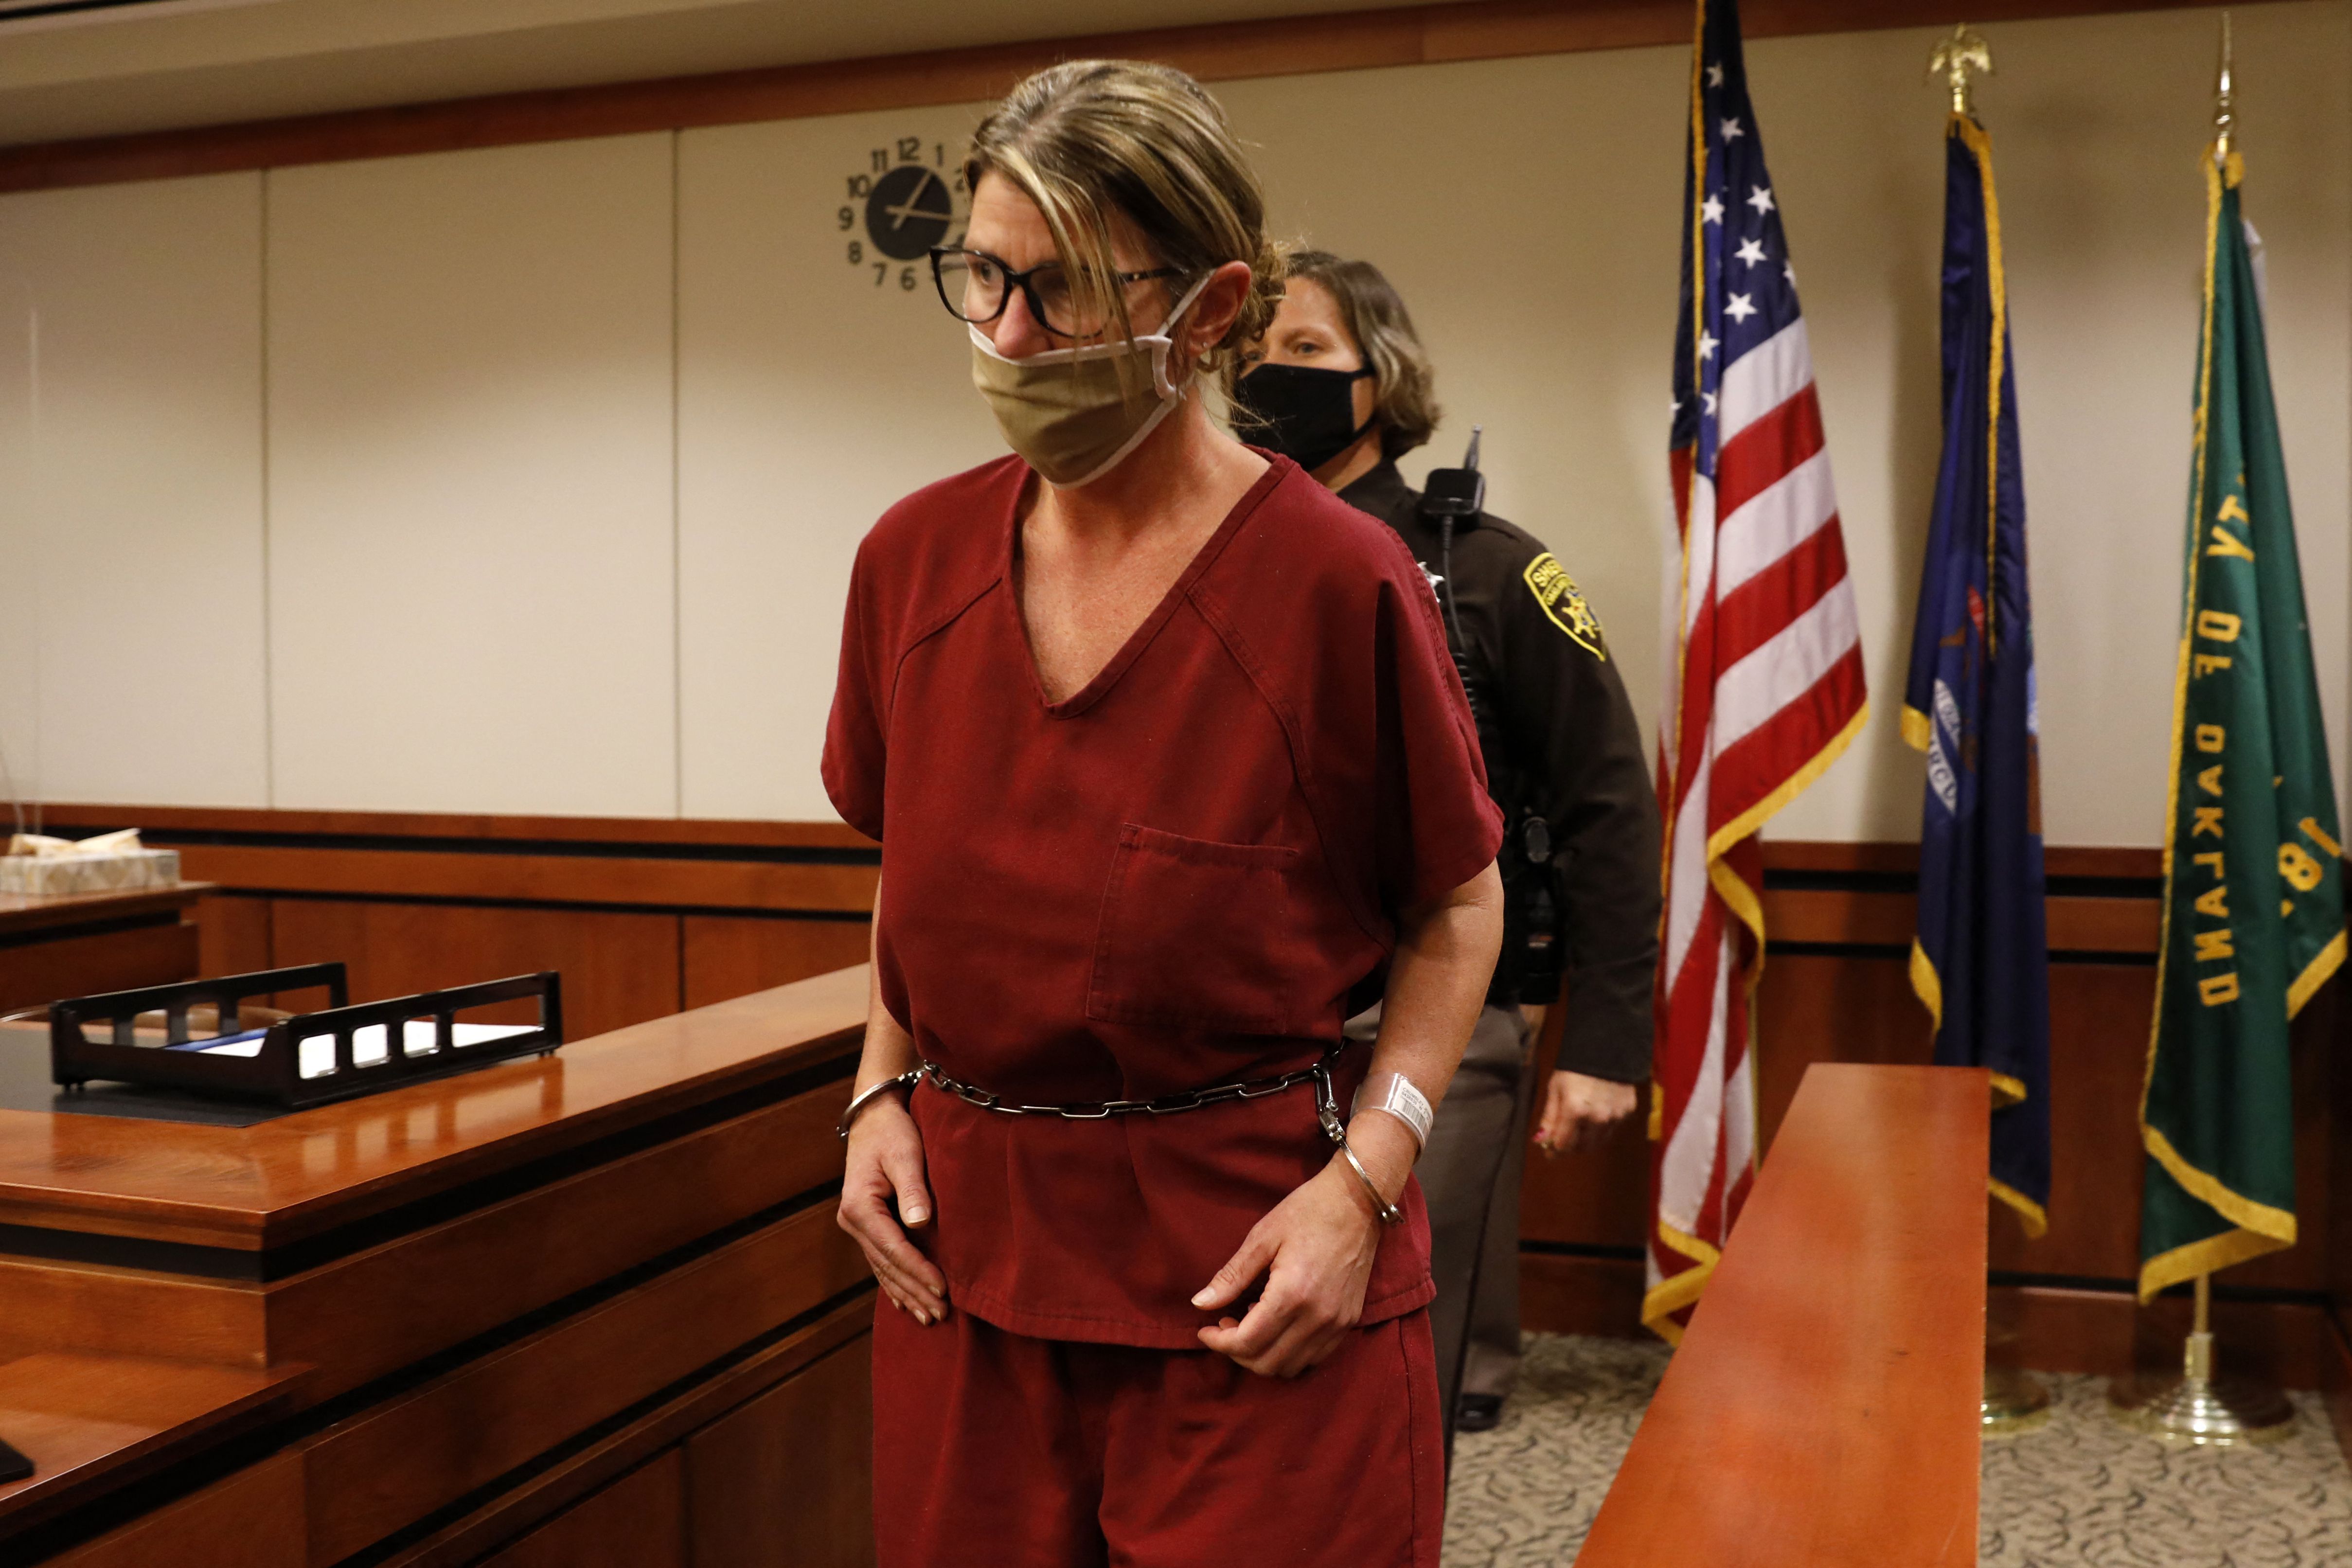 Jennifer Crumbley, 43, mother of Ethan Crumbley, in court on December 14, 2021. (Photo by JEFF KOWALSKY/AFP).